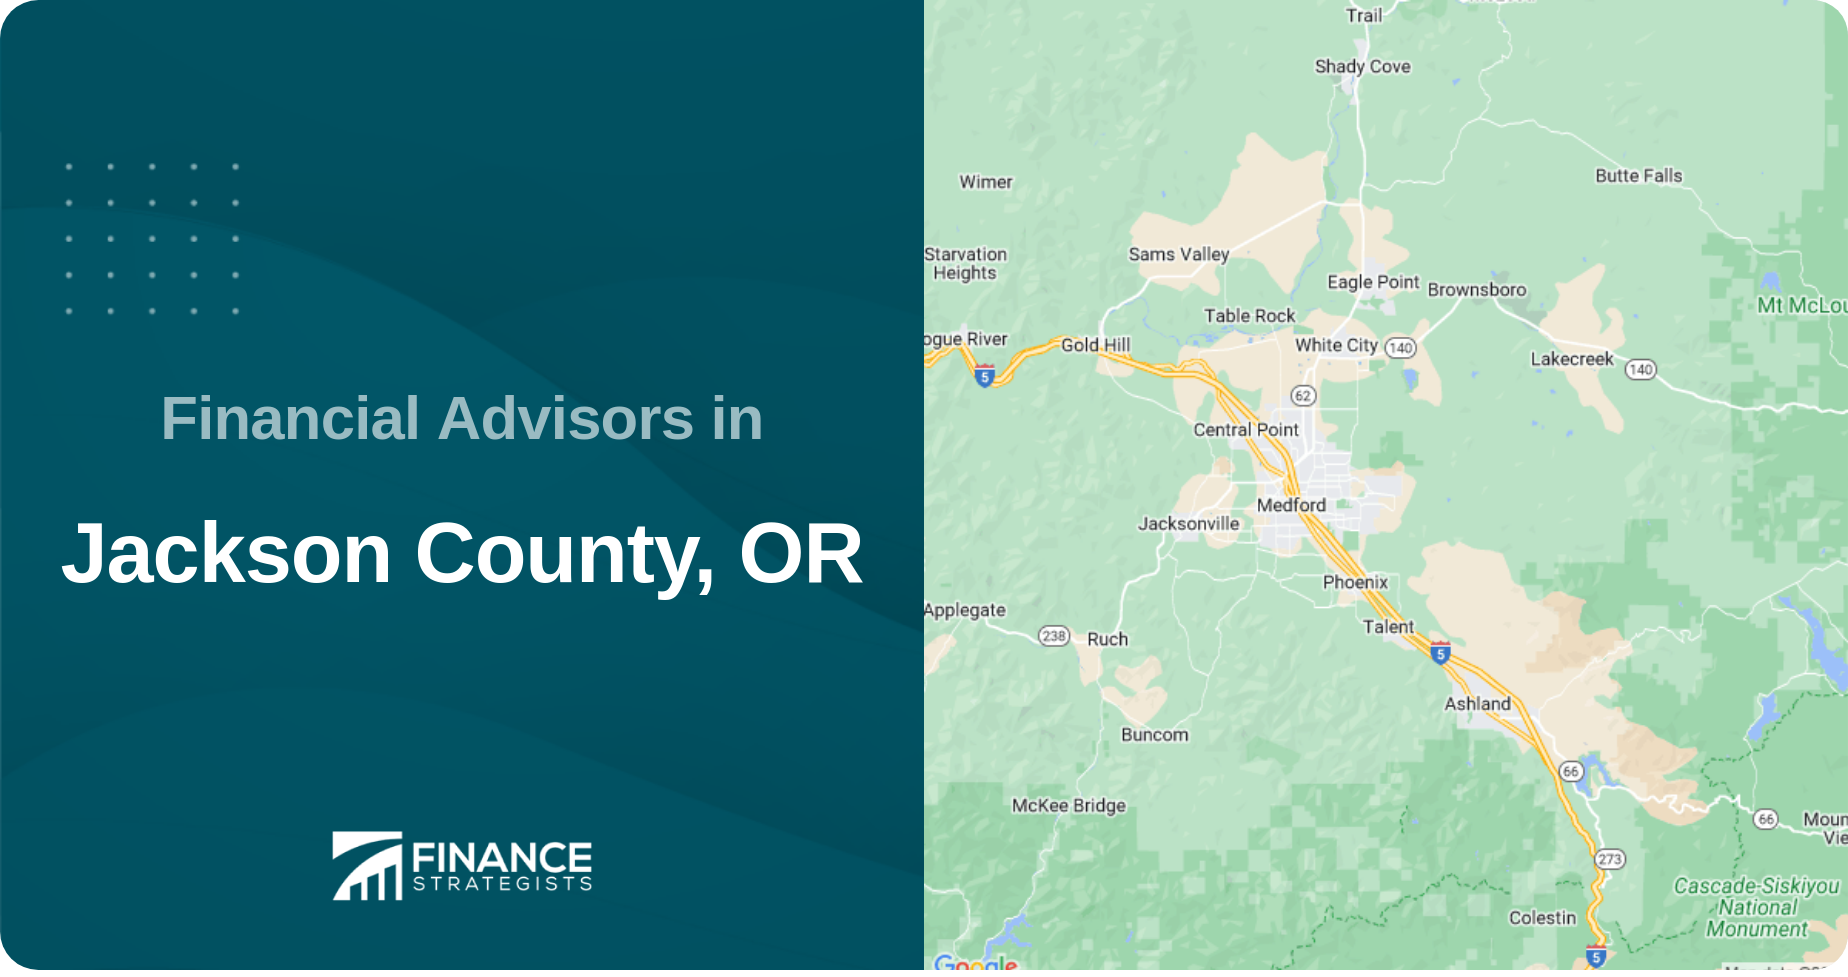 Financial Advisors in Jackson County, OR